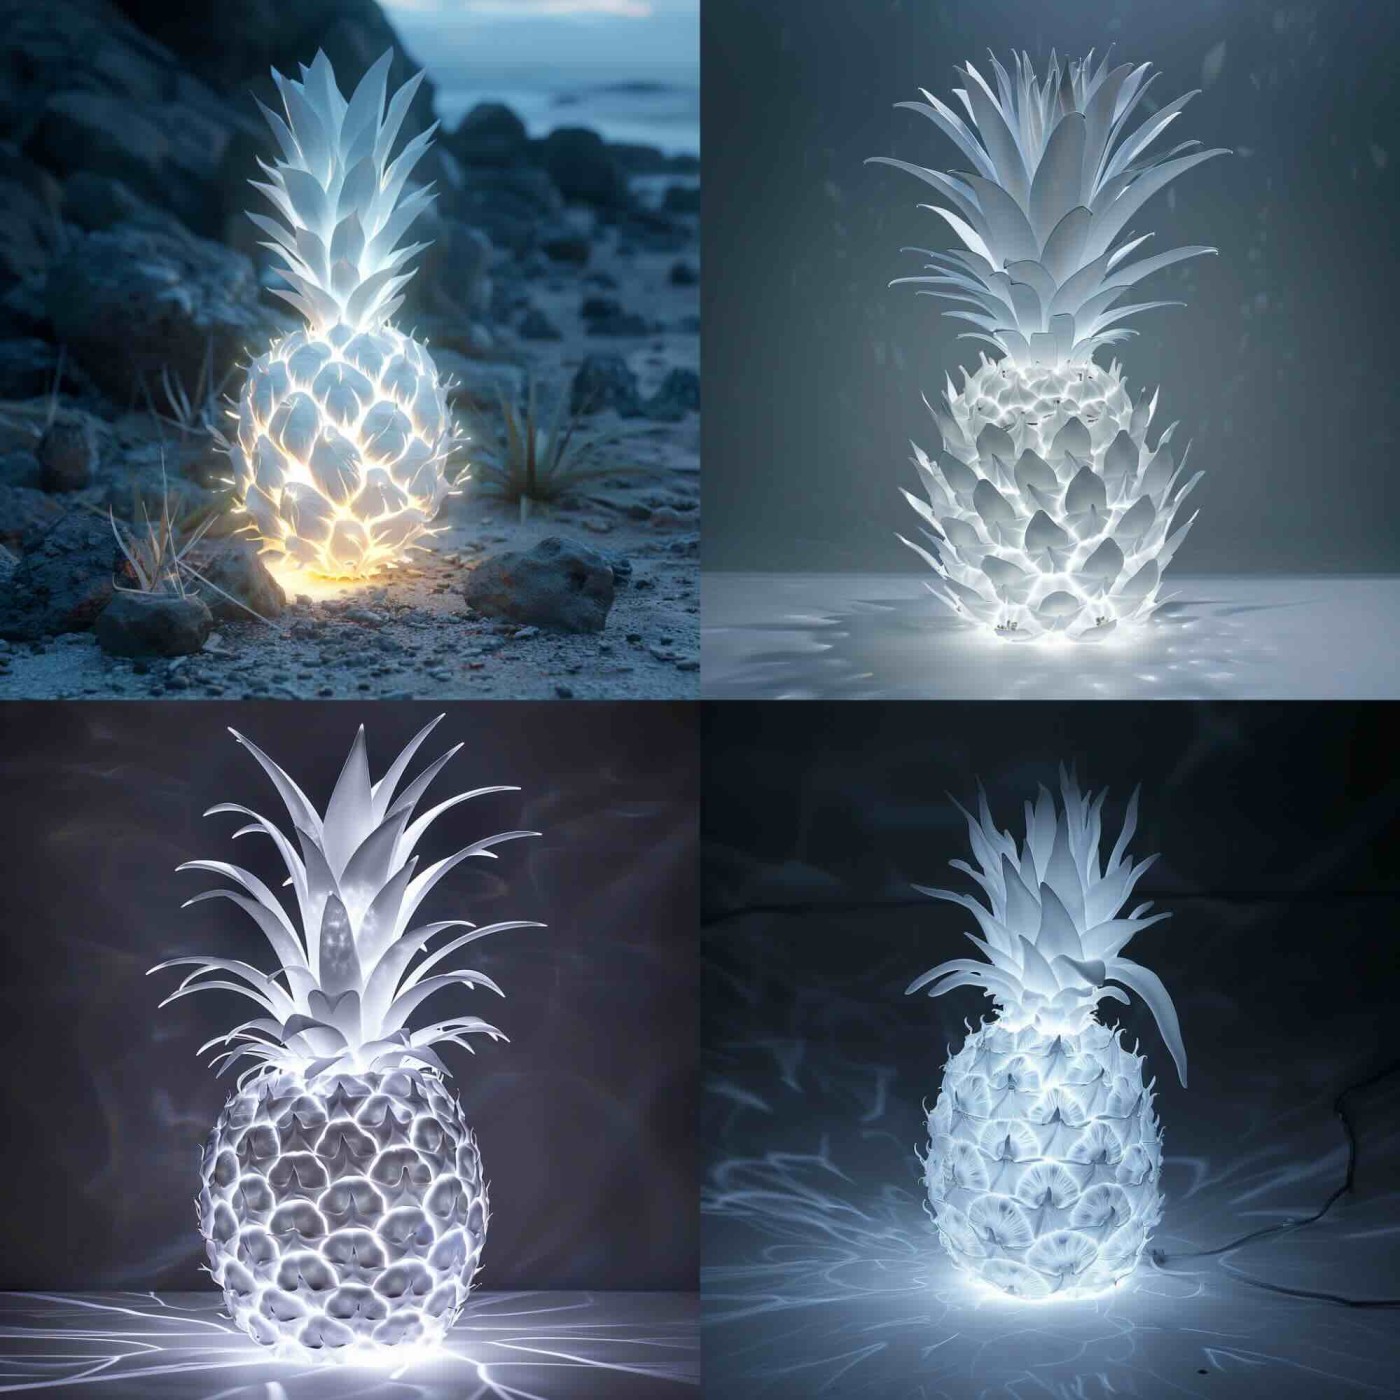 A pineapple made of white light"